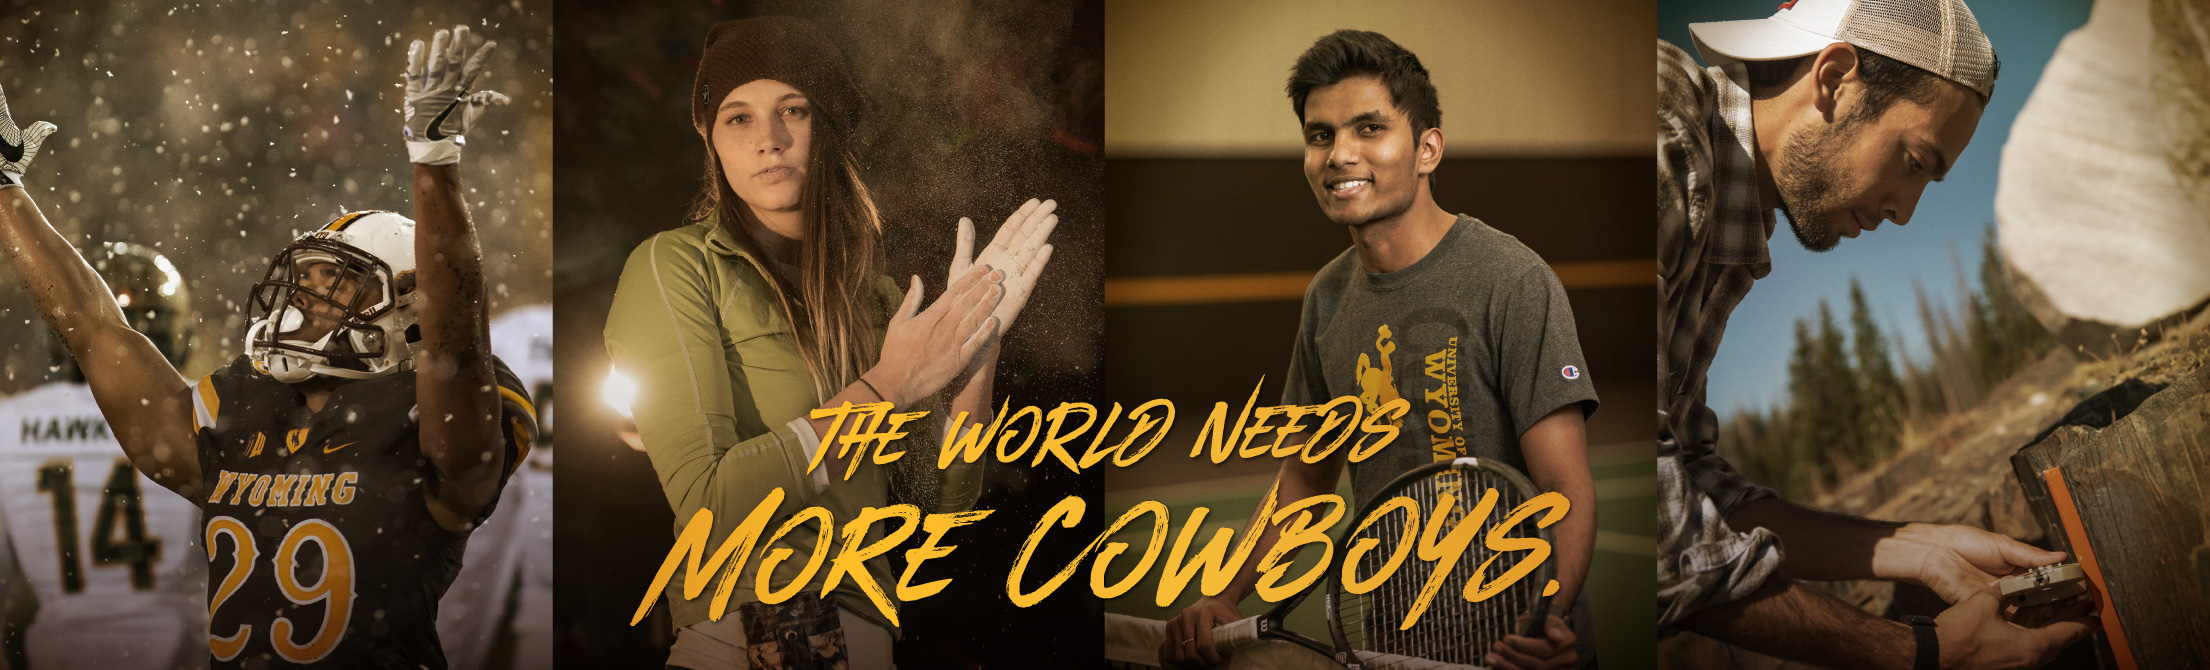 A variety of UW students and the text: the world needs more cowboys.